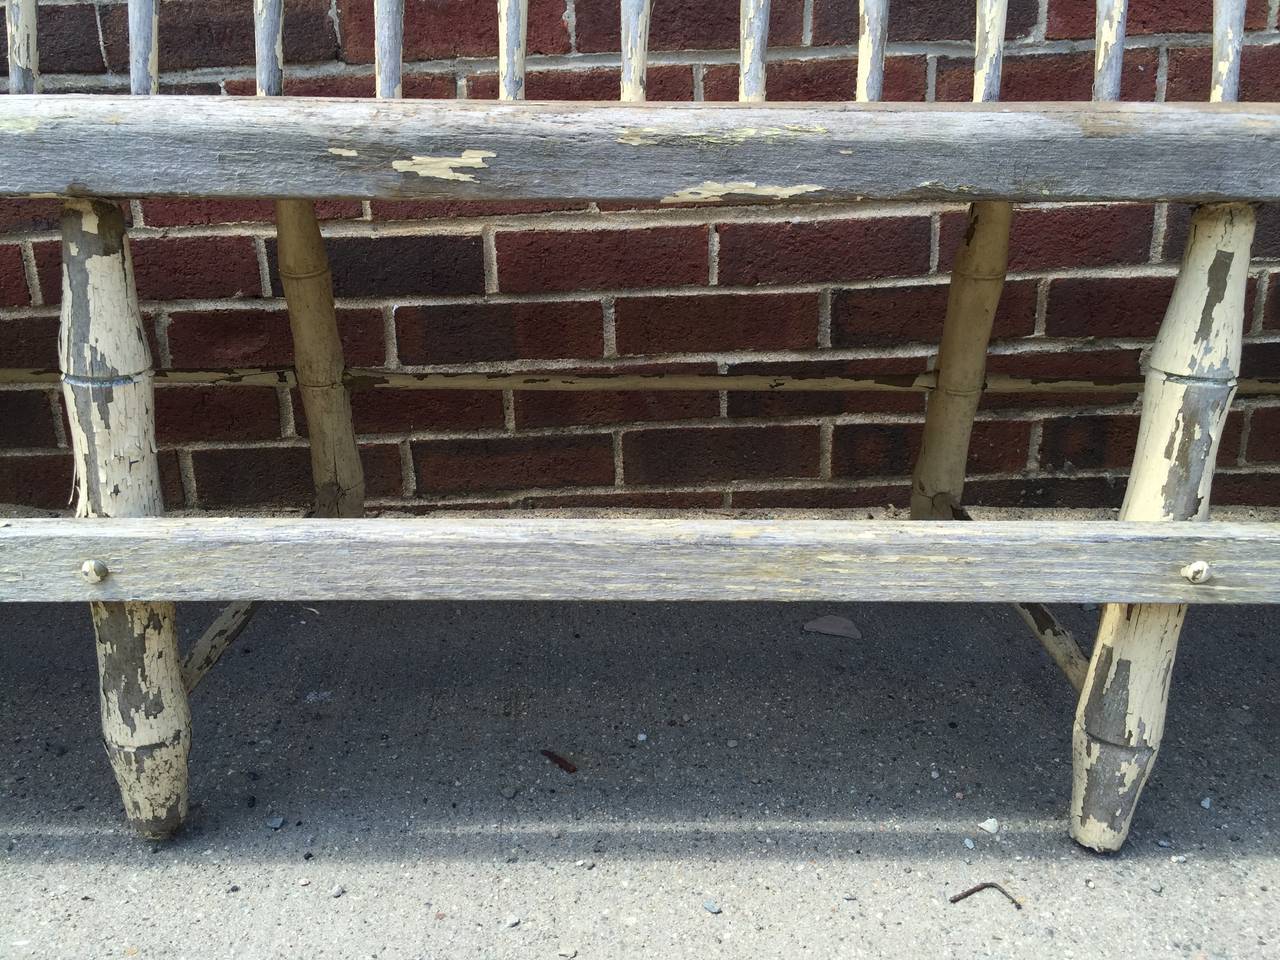 Have a seat.  With 15 of your closest friends.  Cozy up on a piece of Americana from New England.  This truly monumental in scale, rustic, spindle back Deacons bench sat at a train station for many moons and was surely a welcome sight for foot weary